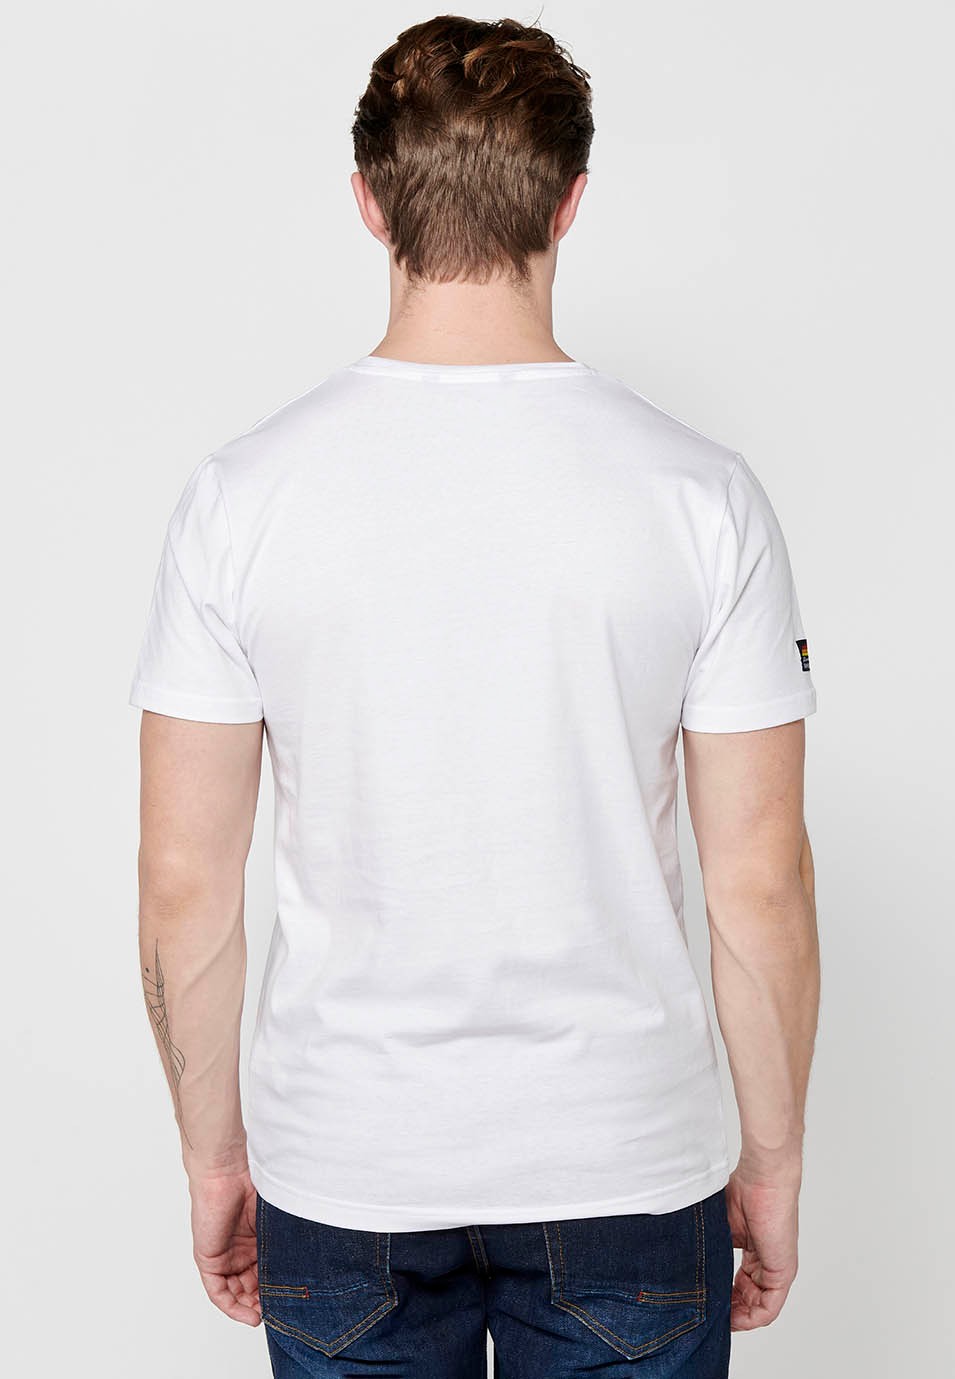 Short-sleeved cotton T-shirt with bicycle front print, white for men